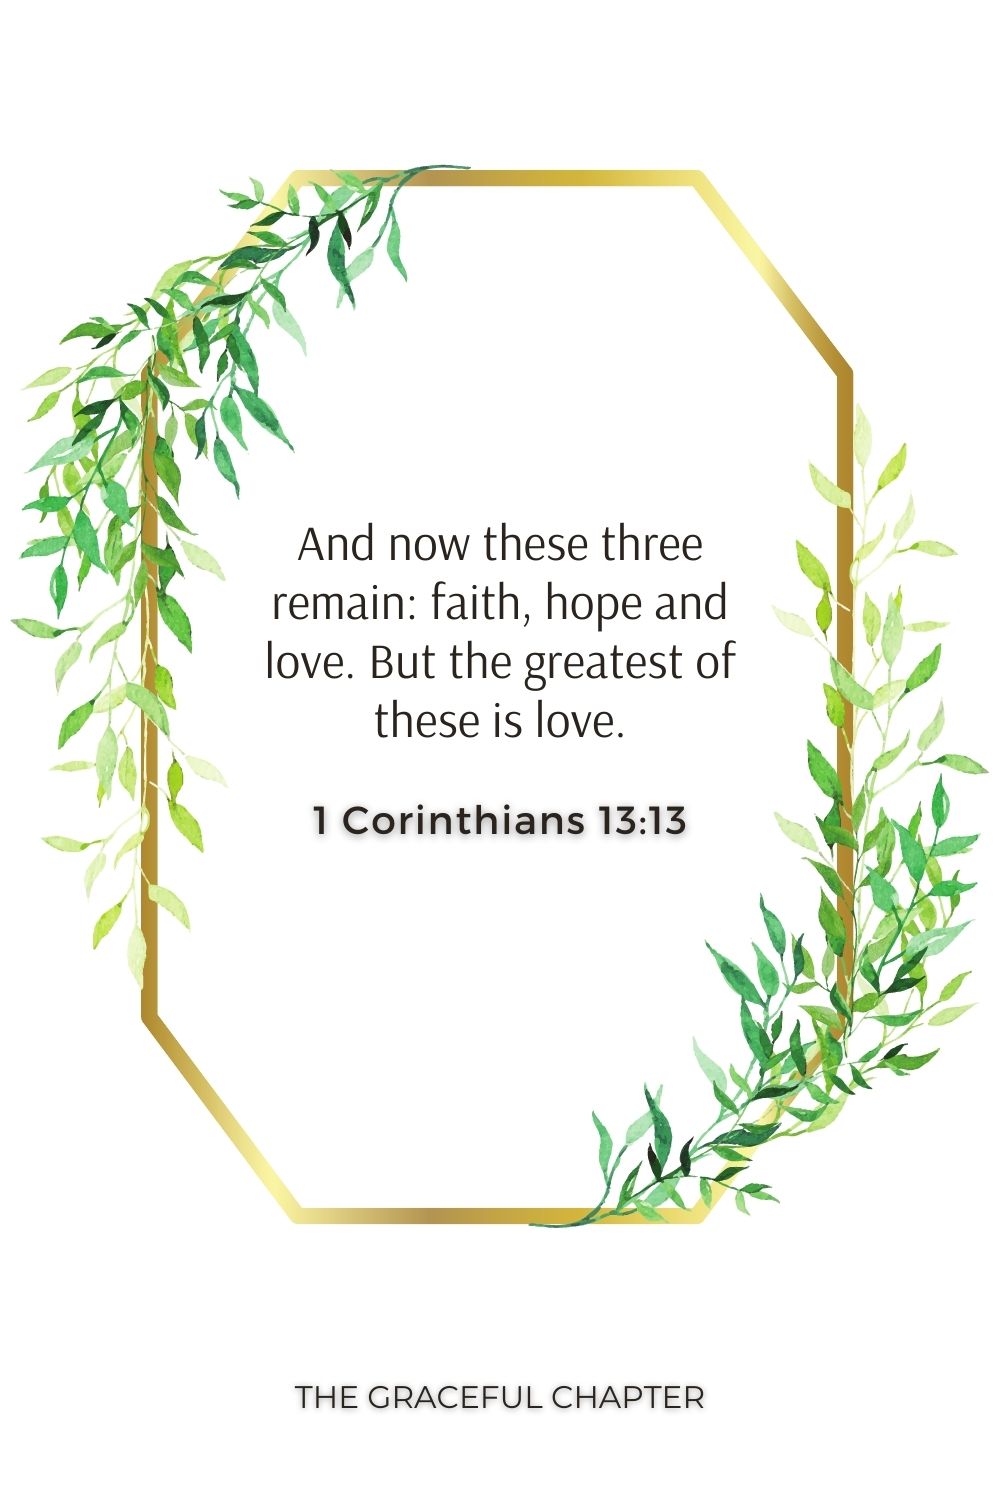 And now these three remain: faith, hope and love. But the greatest of these is love. 1 Corinthians 13:13